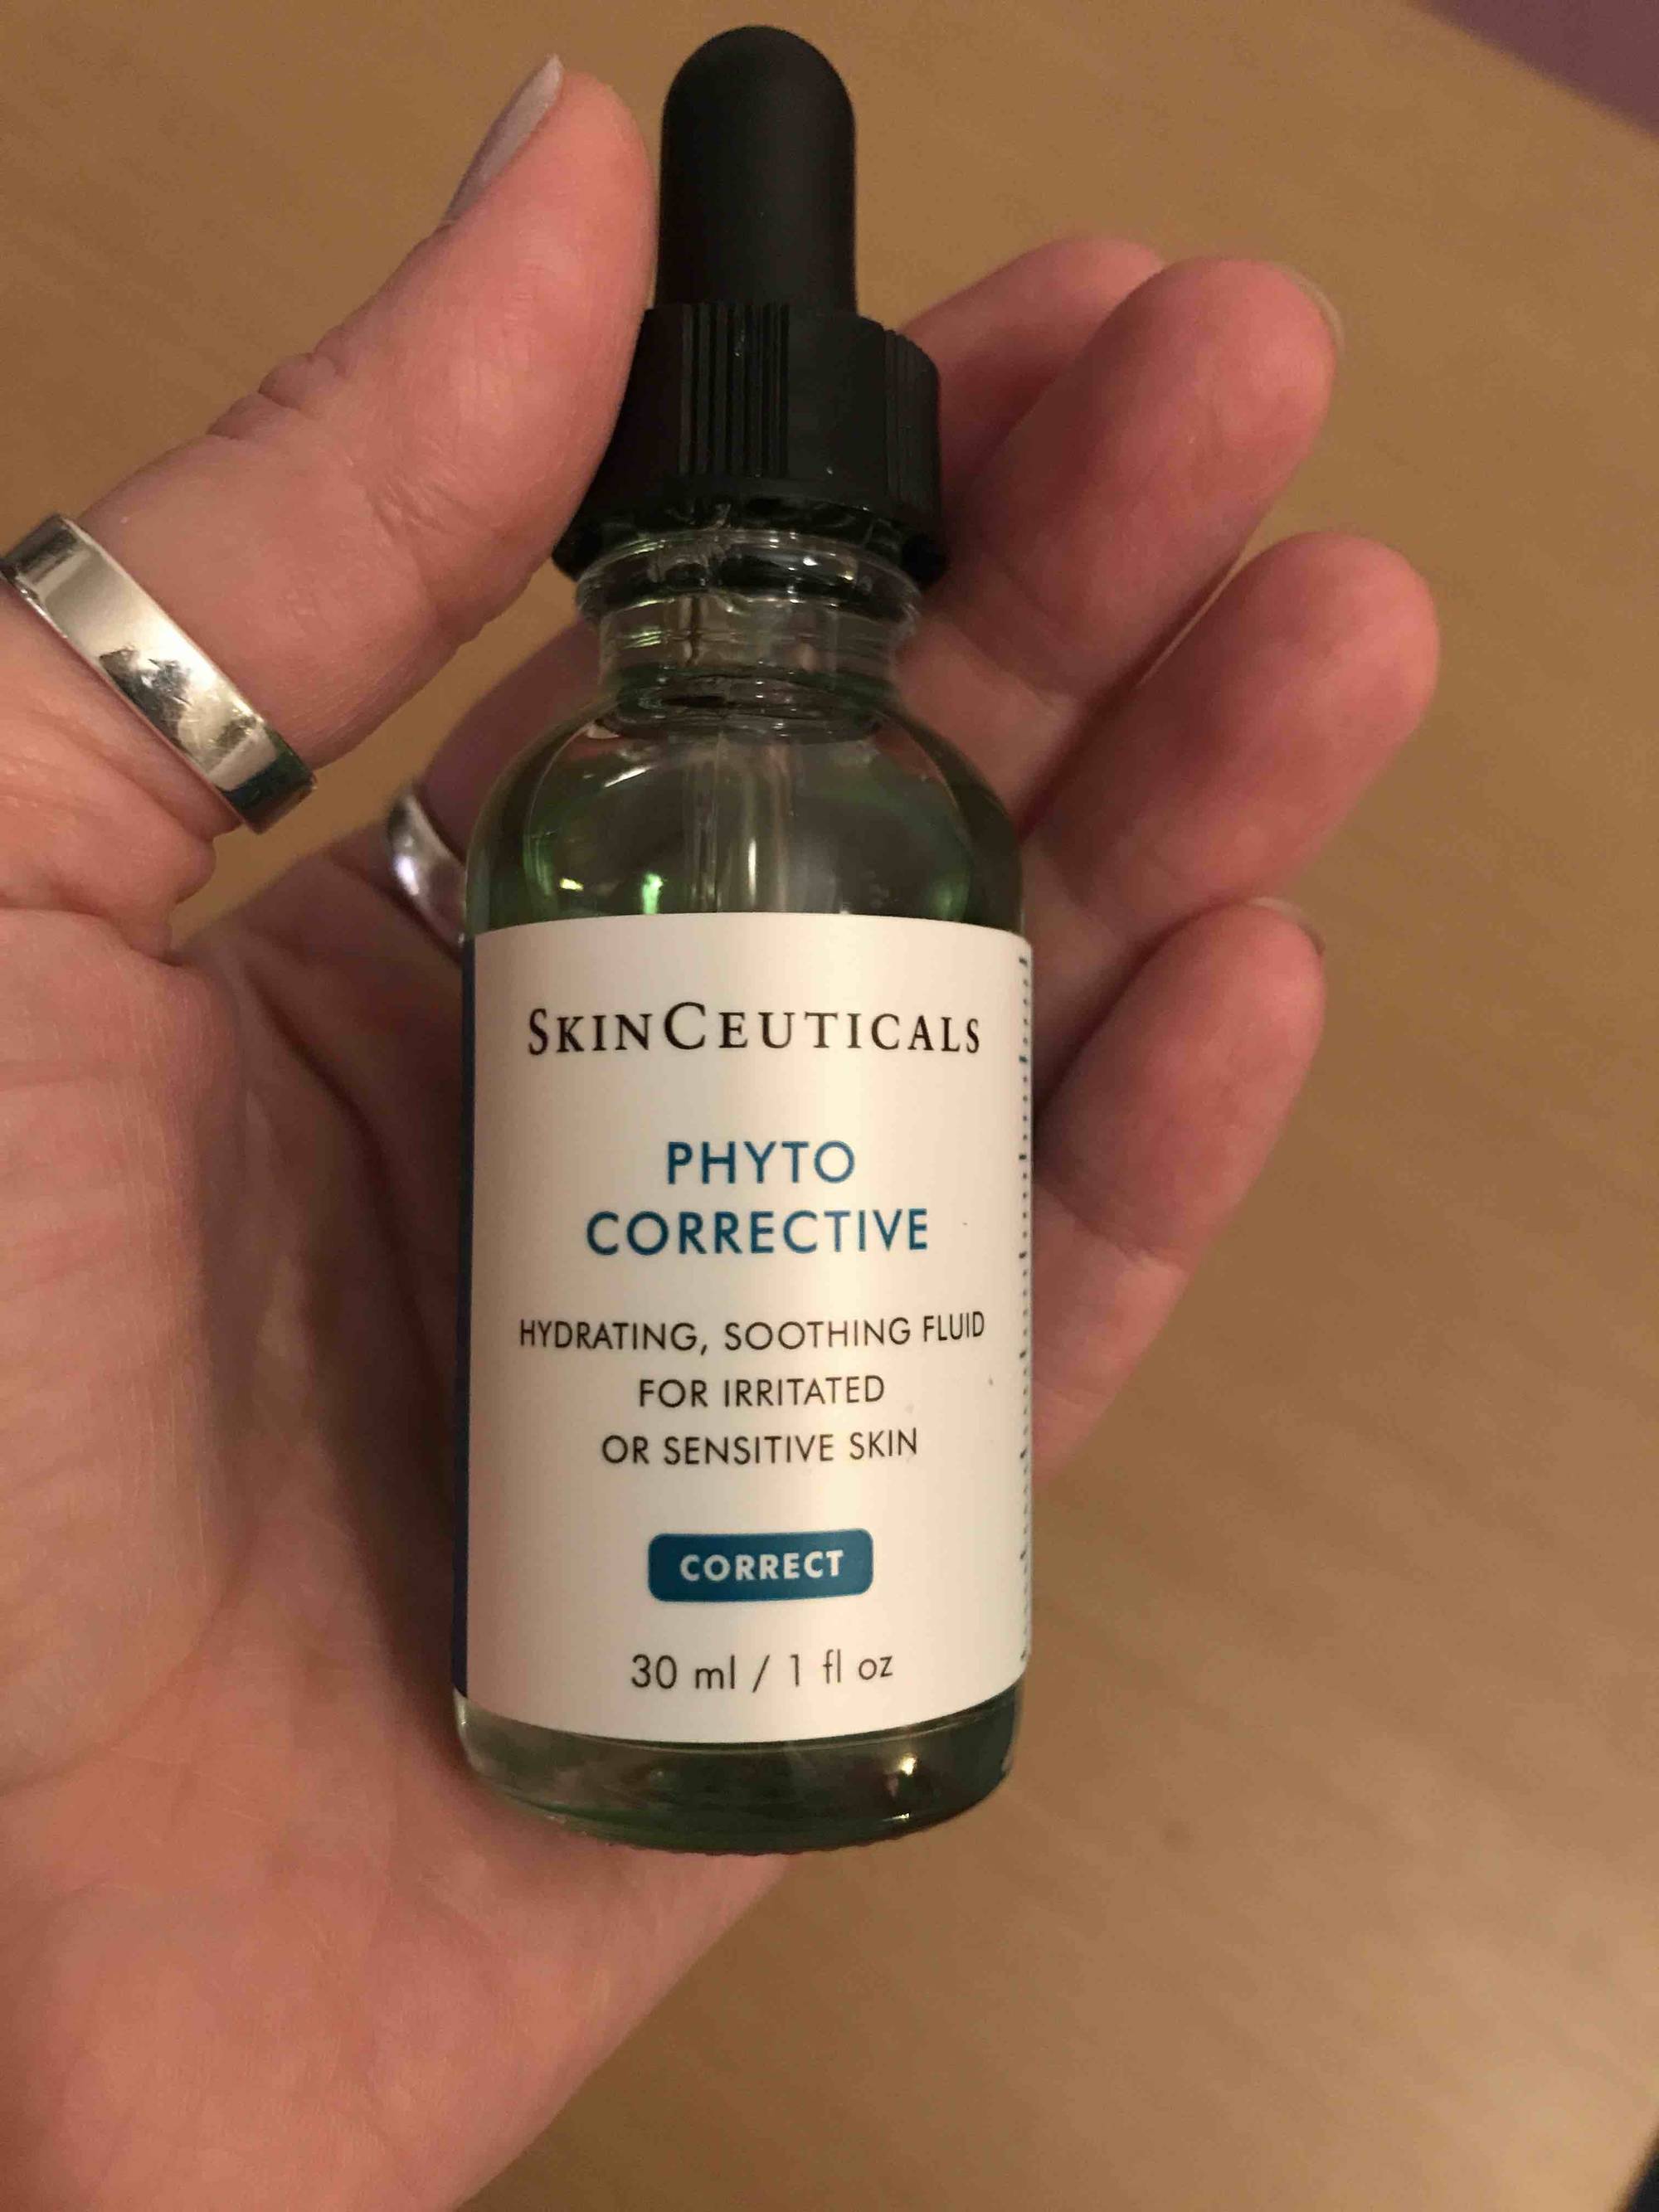 SKINCEUTICALS - Correct - Phyto corrective - Hydrating, soothing fluid for irritated or sensitive skin